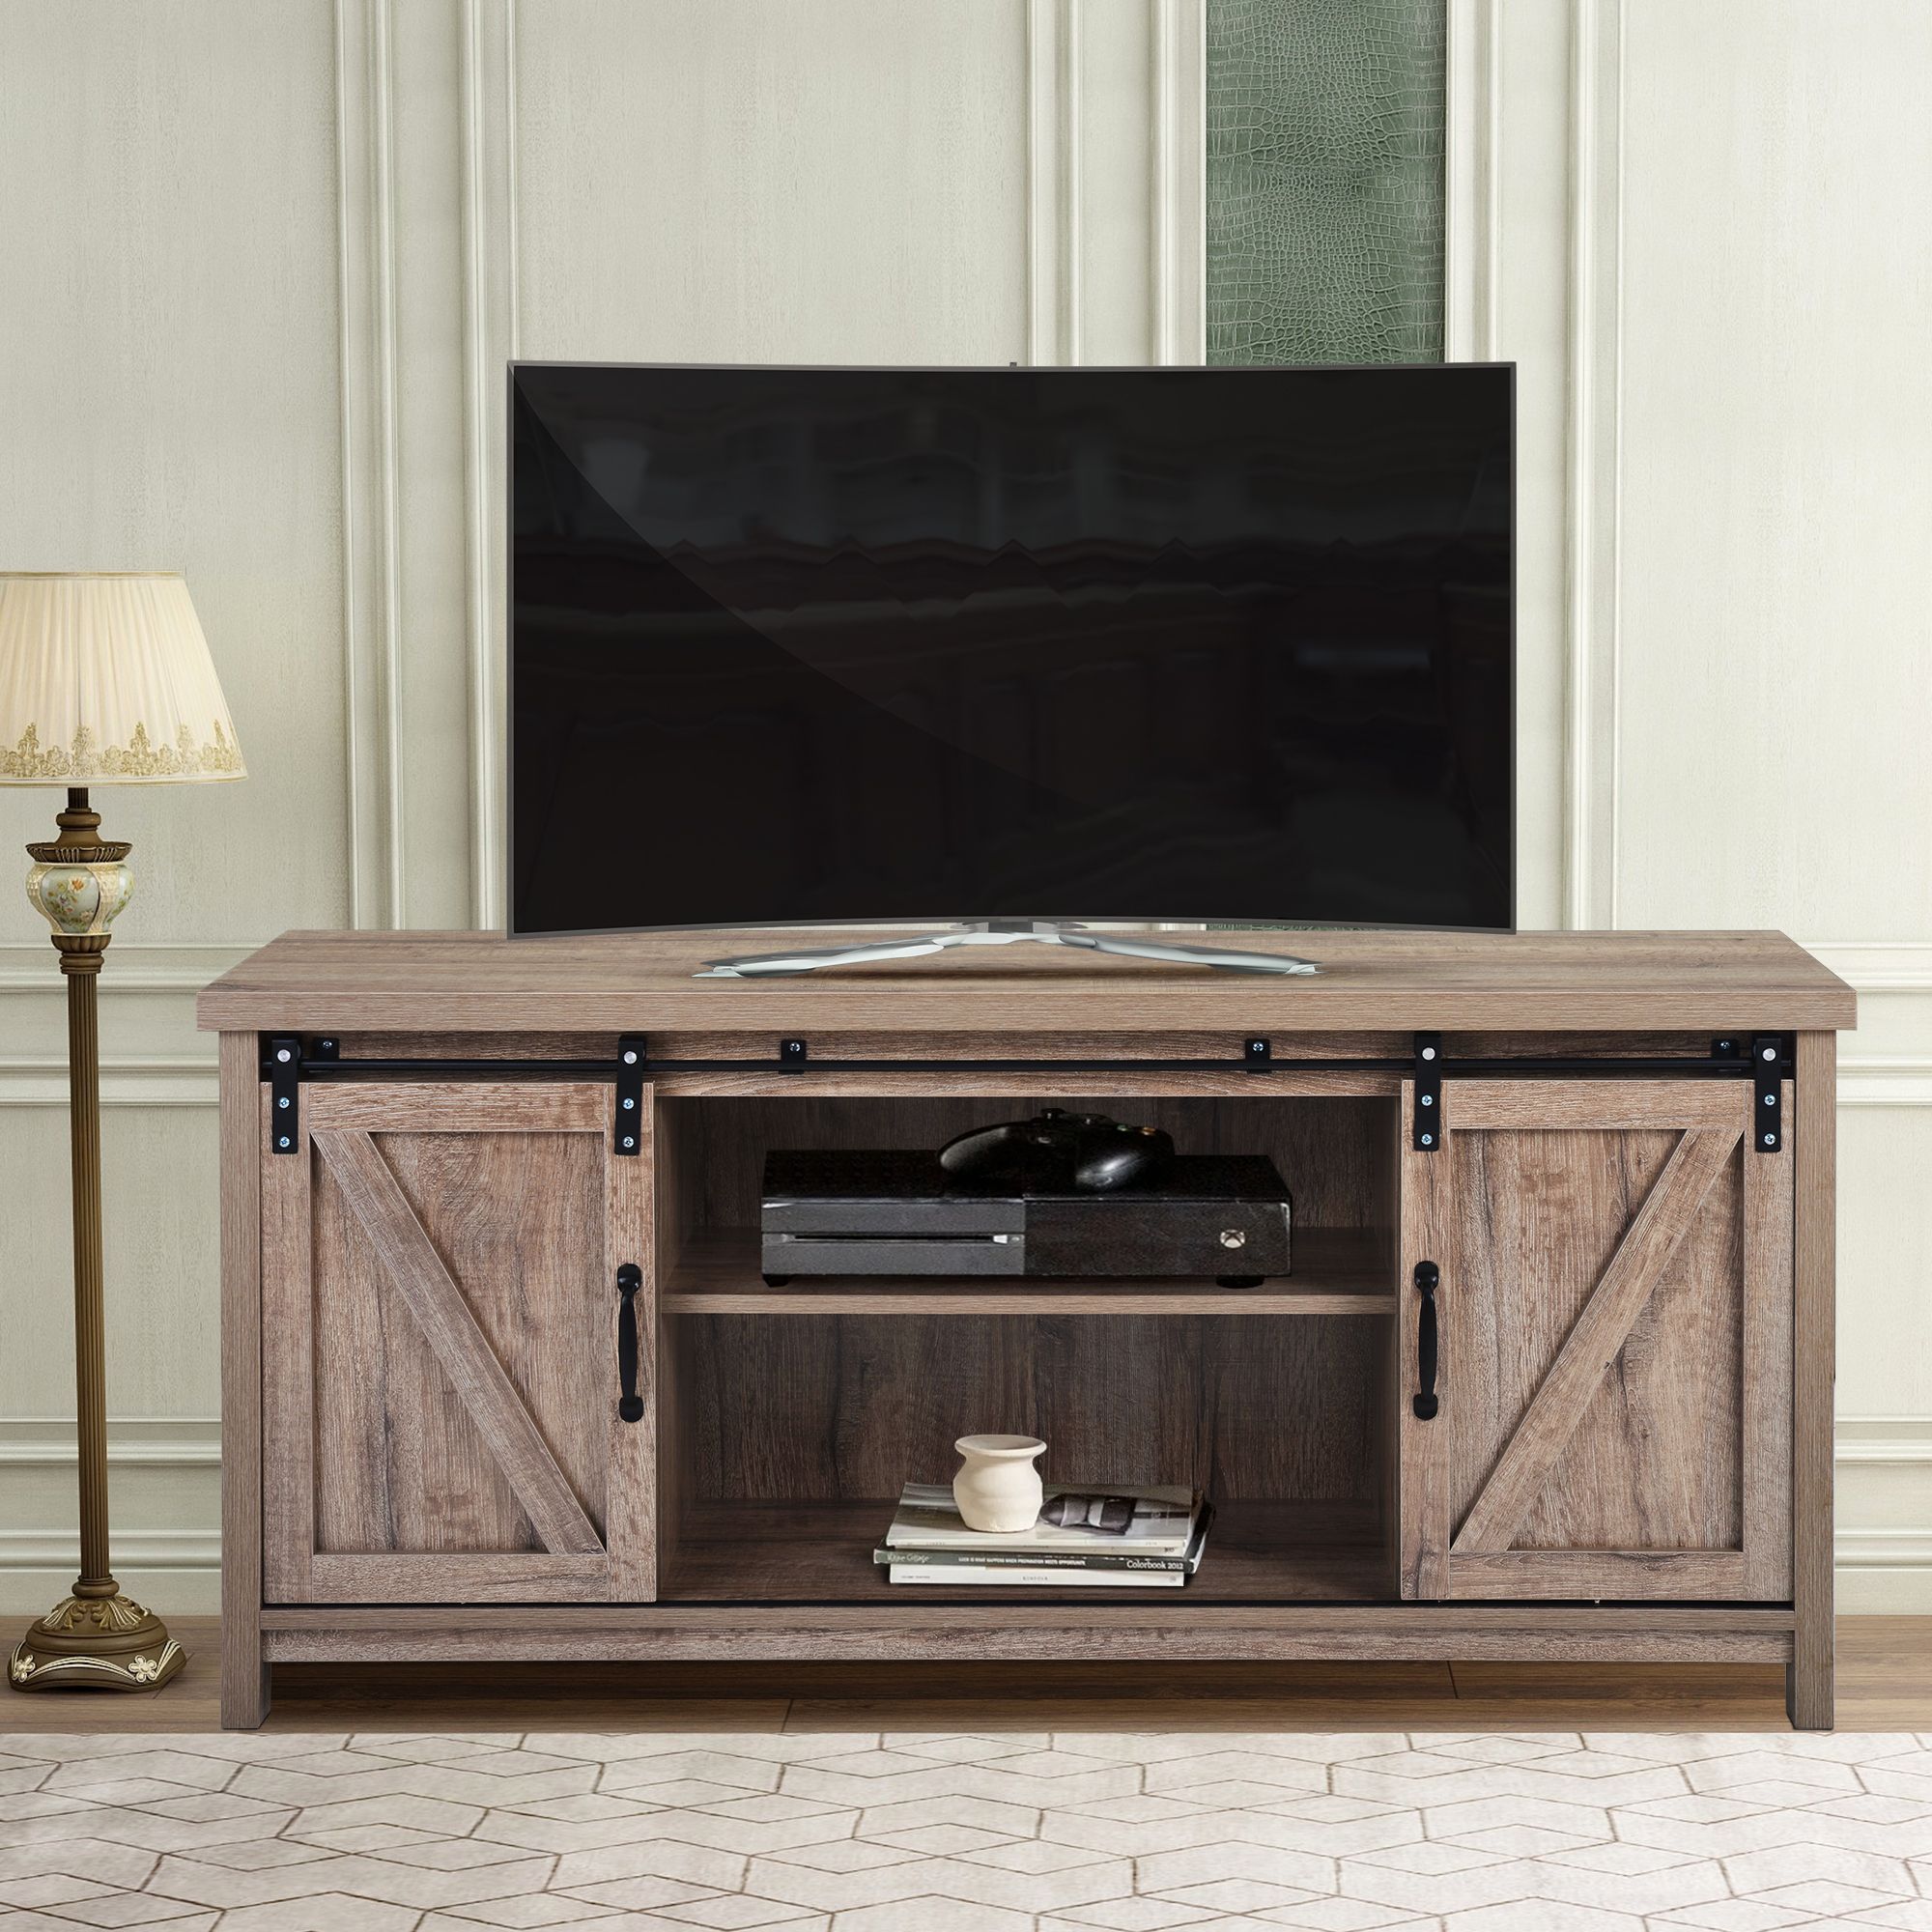 Wood Tv Stand, Modern Corner Tv Table Stands, Rustic Style Throughout Rustic Corner Tv Stands (View 3 of 15)